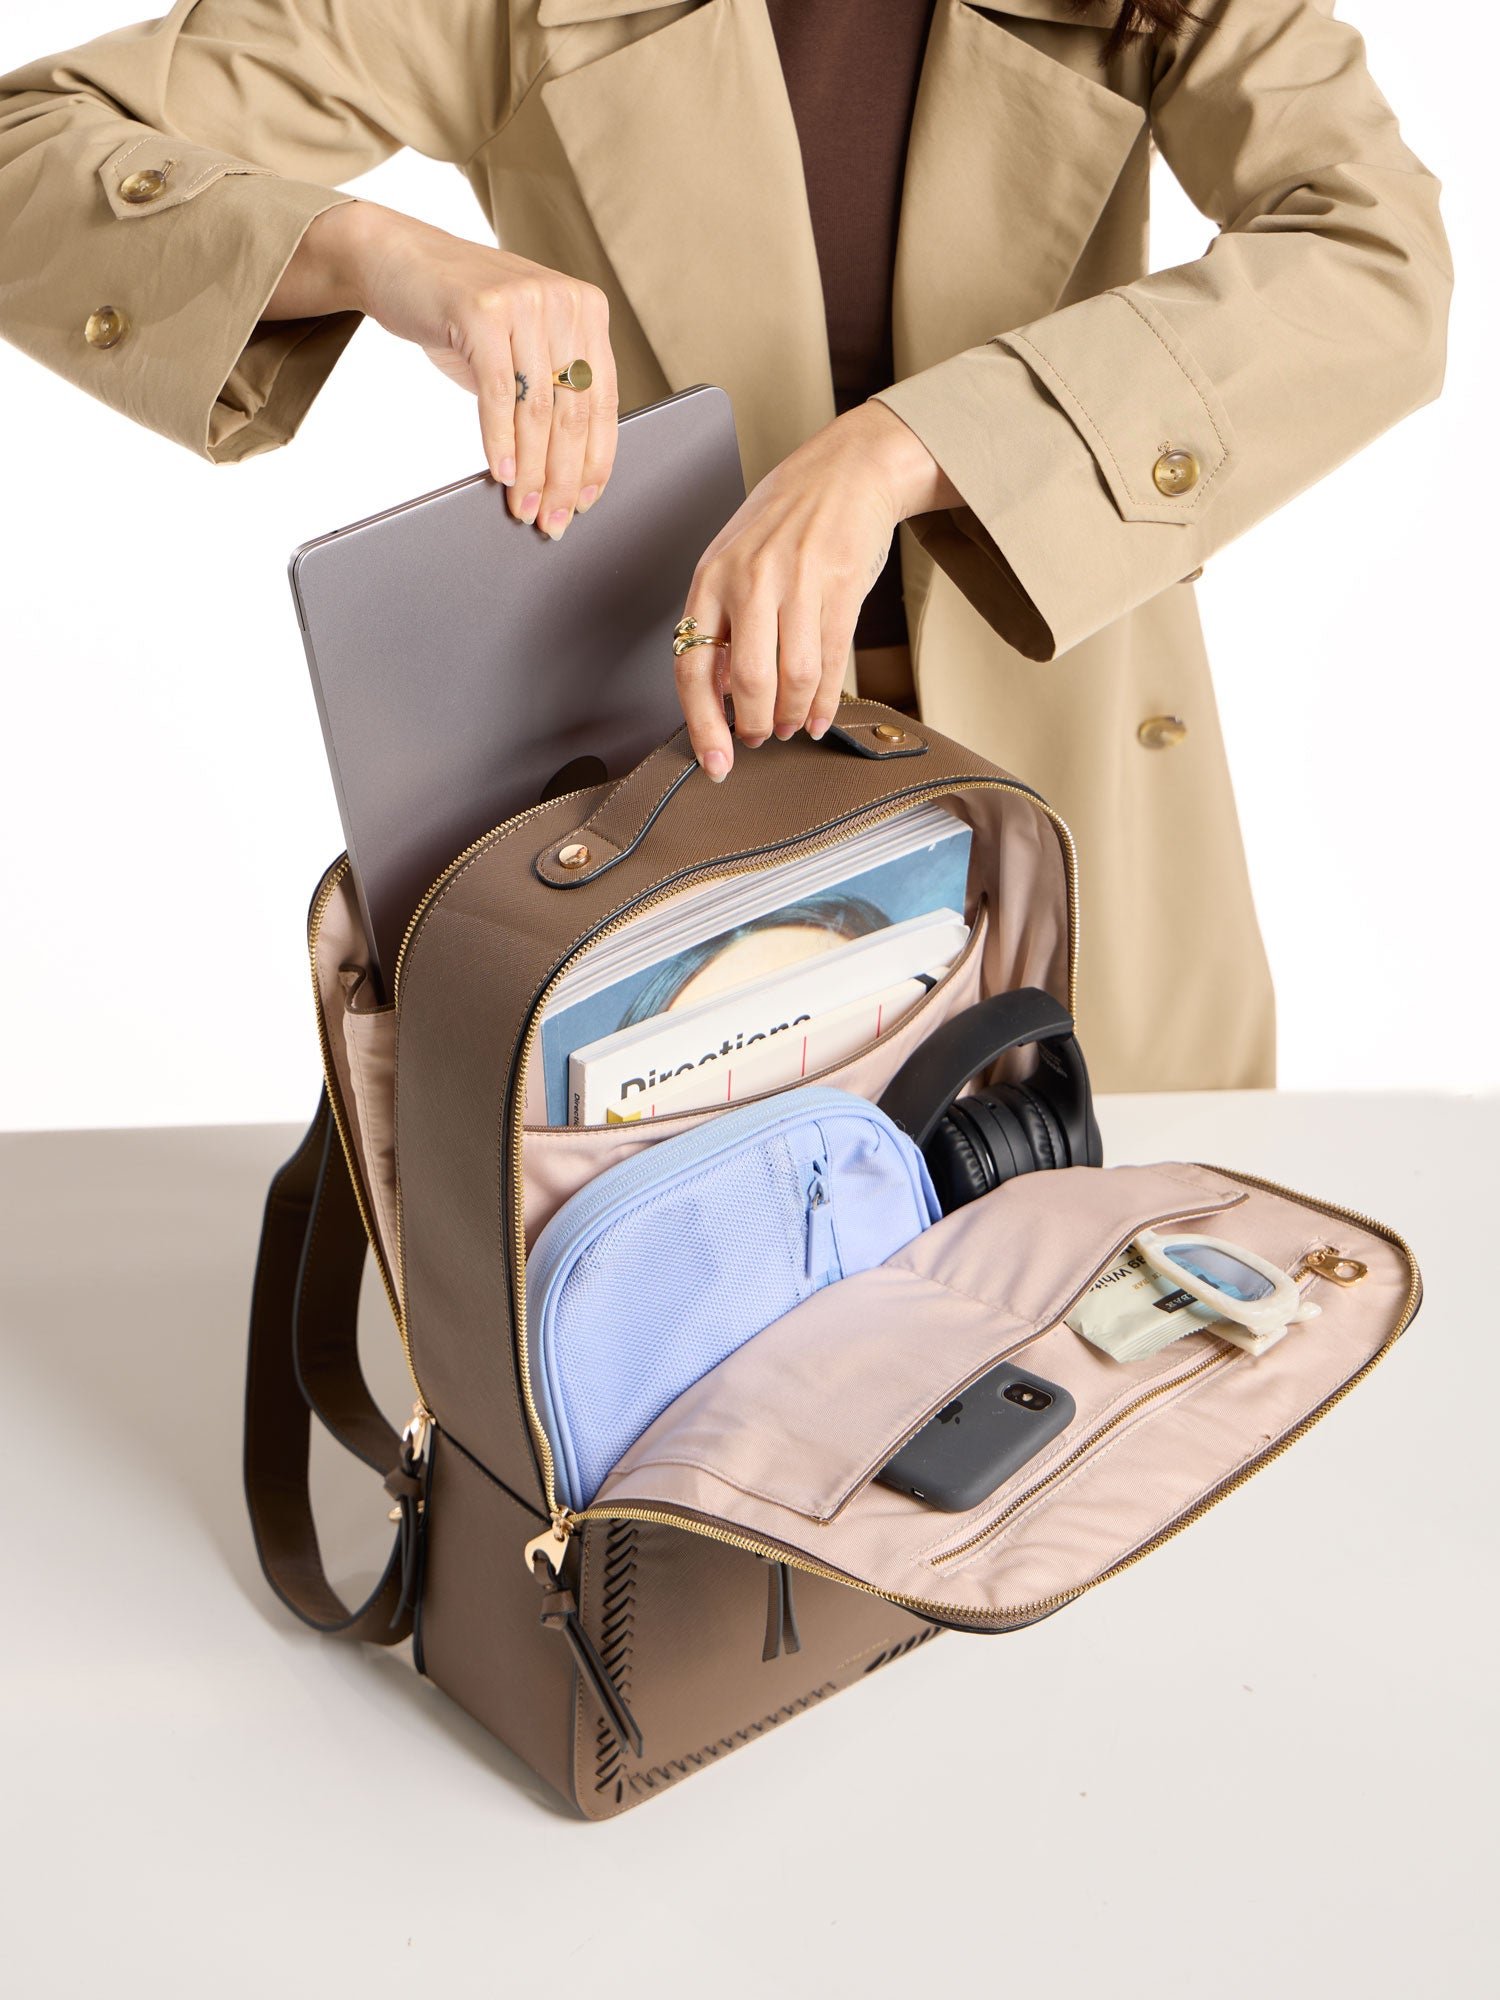 Model placing 17 inch laptop within laptop compartment of CALPAK laptop backpack in brown mocha